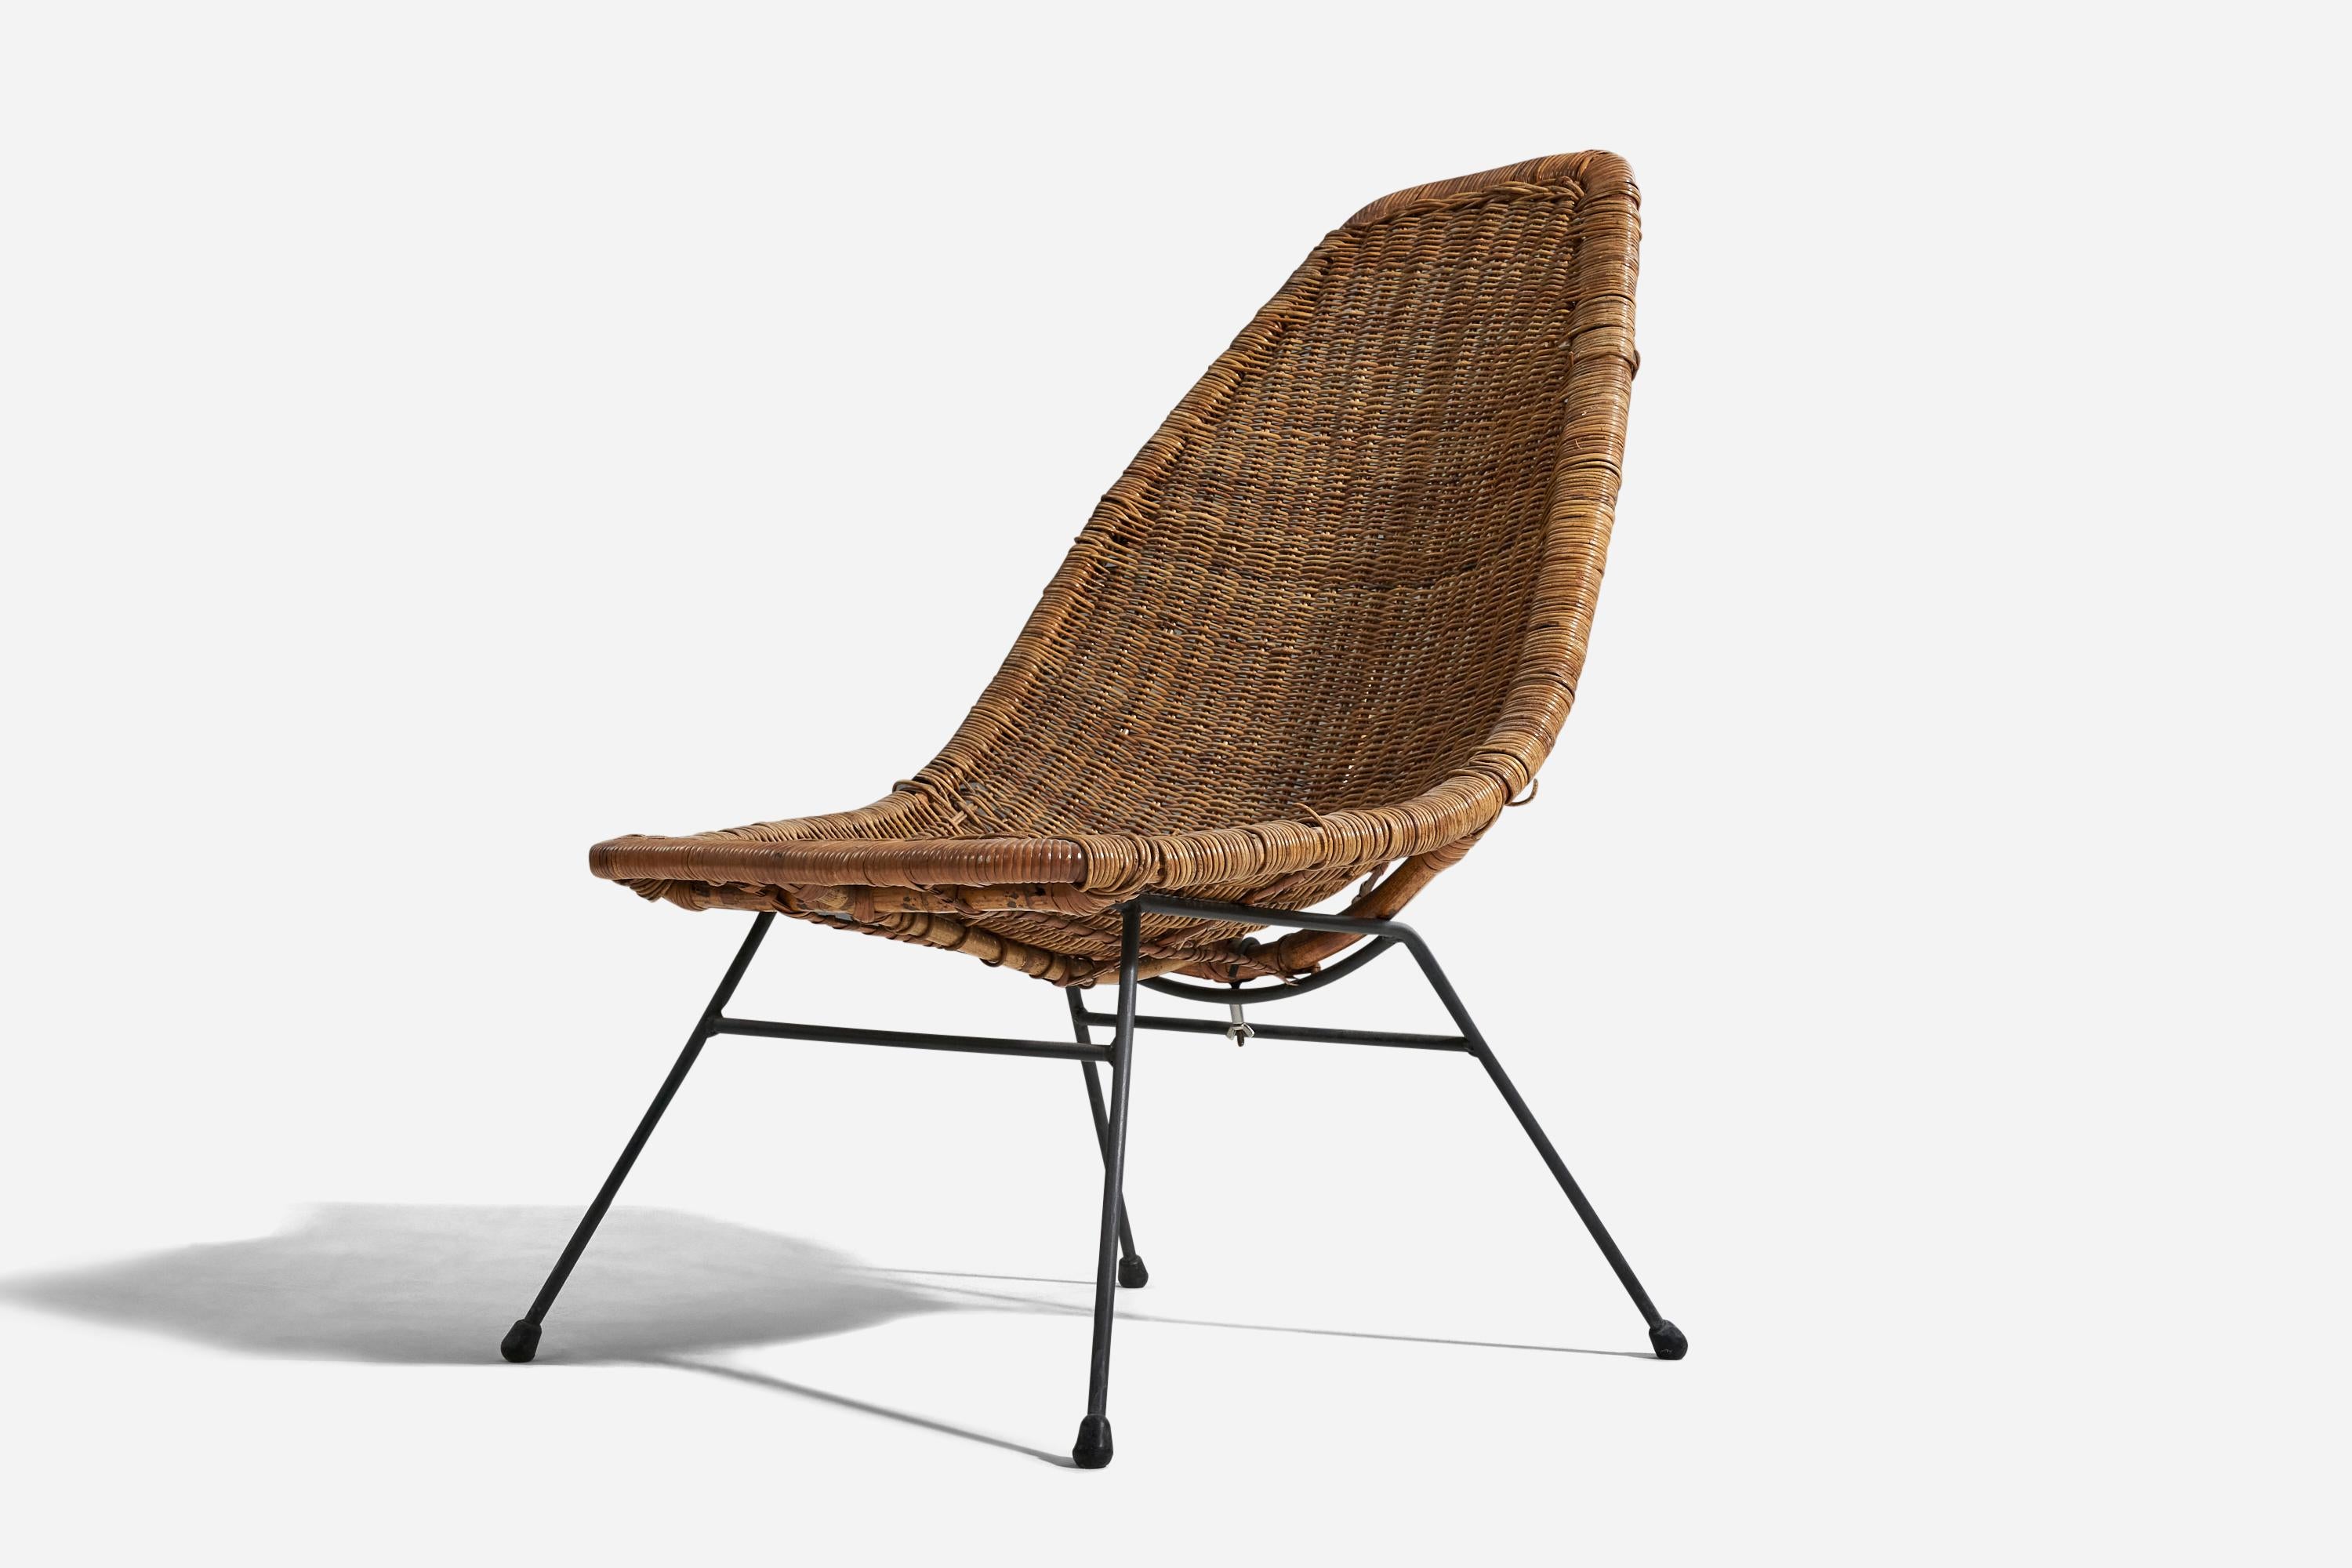 Mid-Century Modern American Designer, Lounge Chair, Rattan, Metal, United States, 1950s For Sale